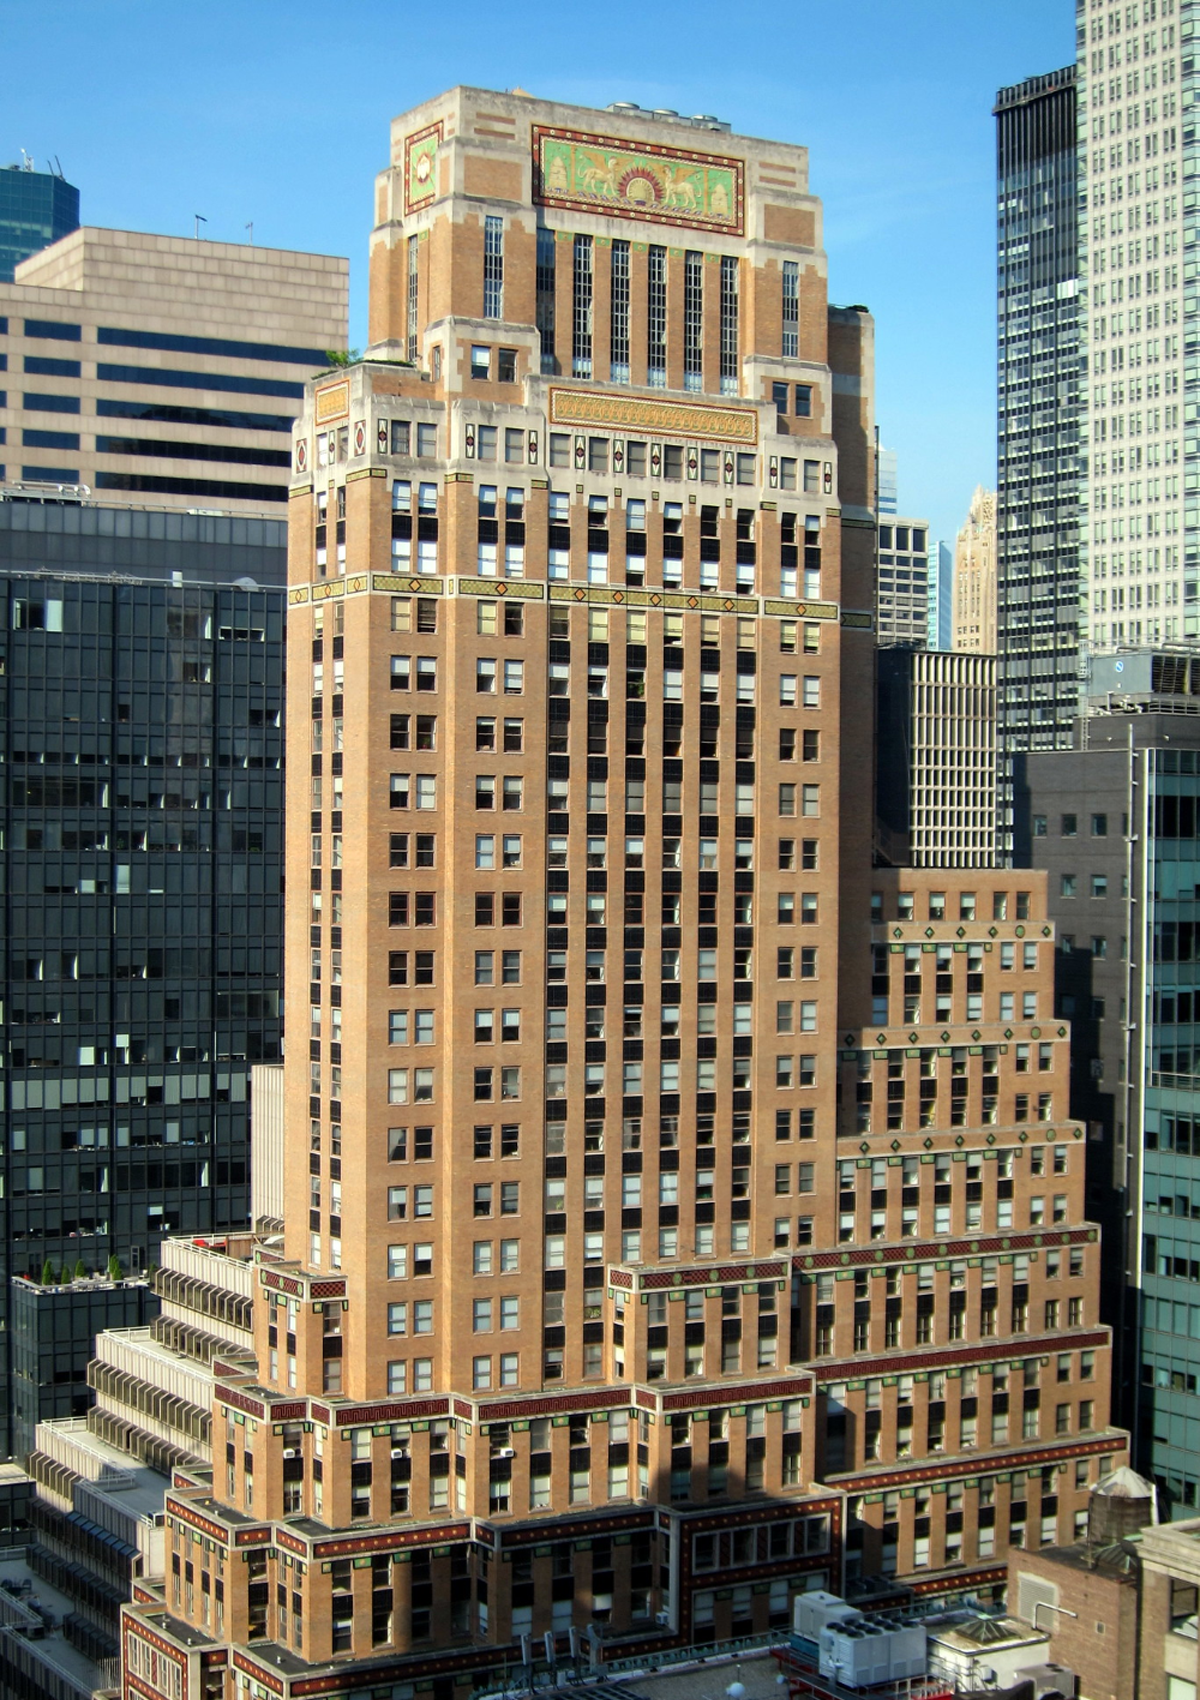 FRED F.FRENCH BUILDING, ნიუ-იორკი